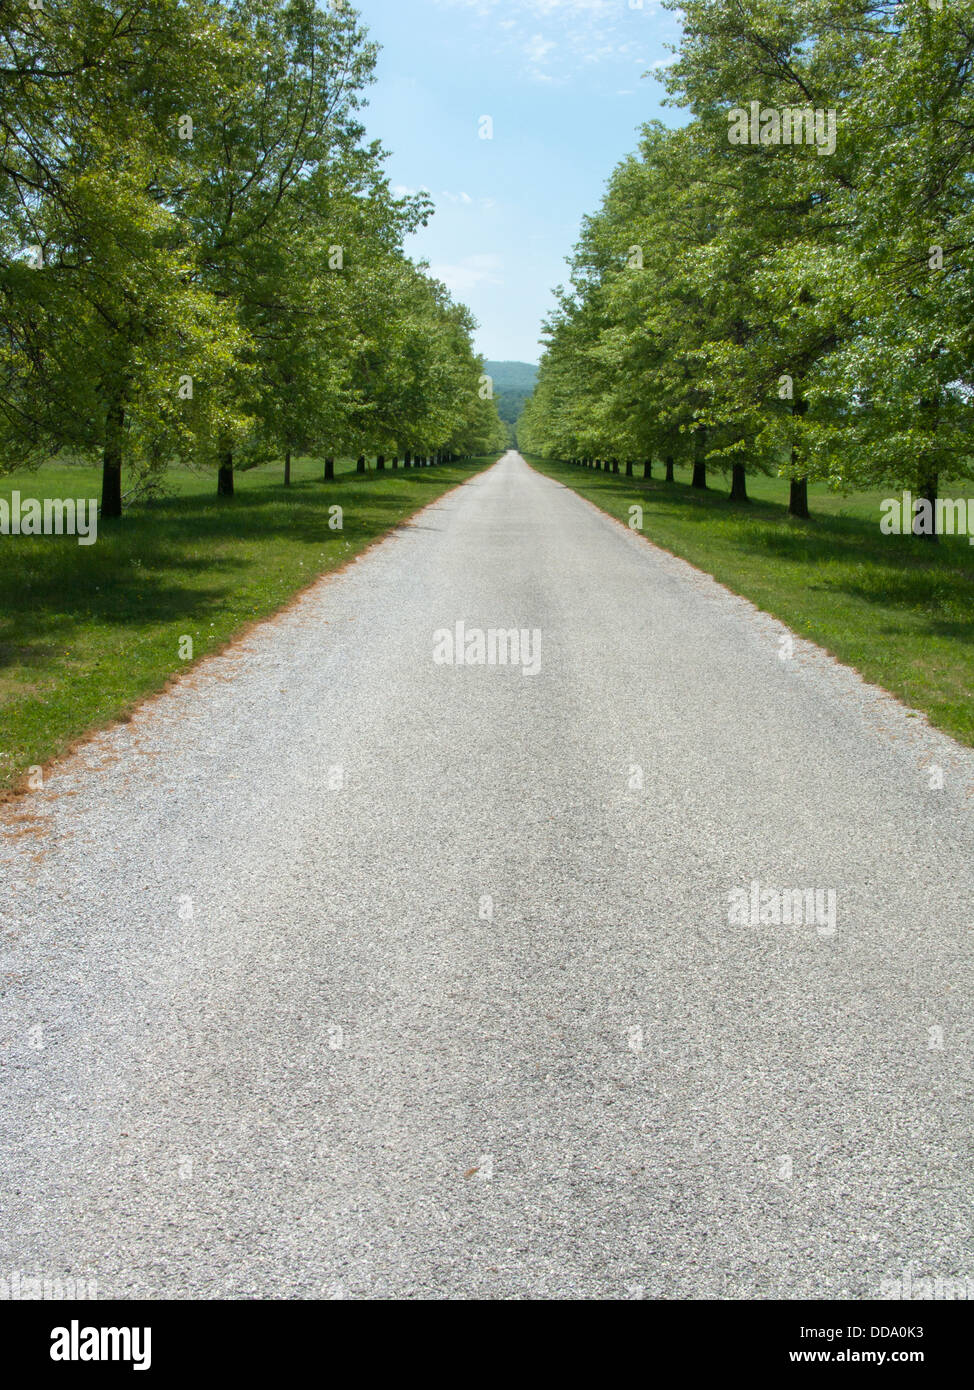 EMPTY RURAL TREE LINED ROAD Stock Photo